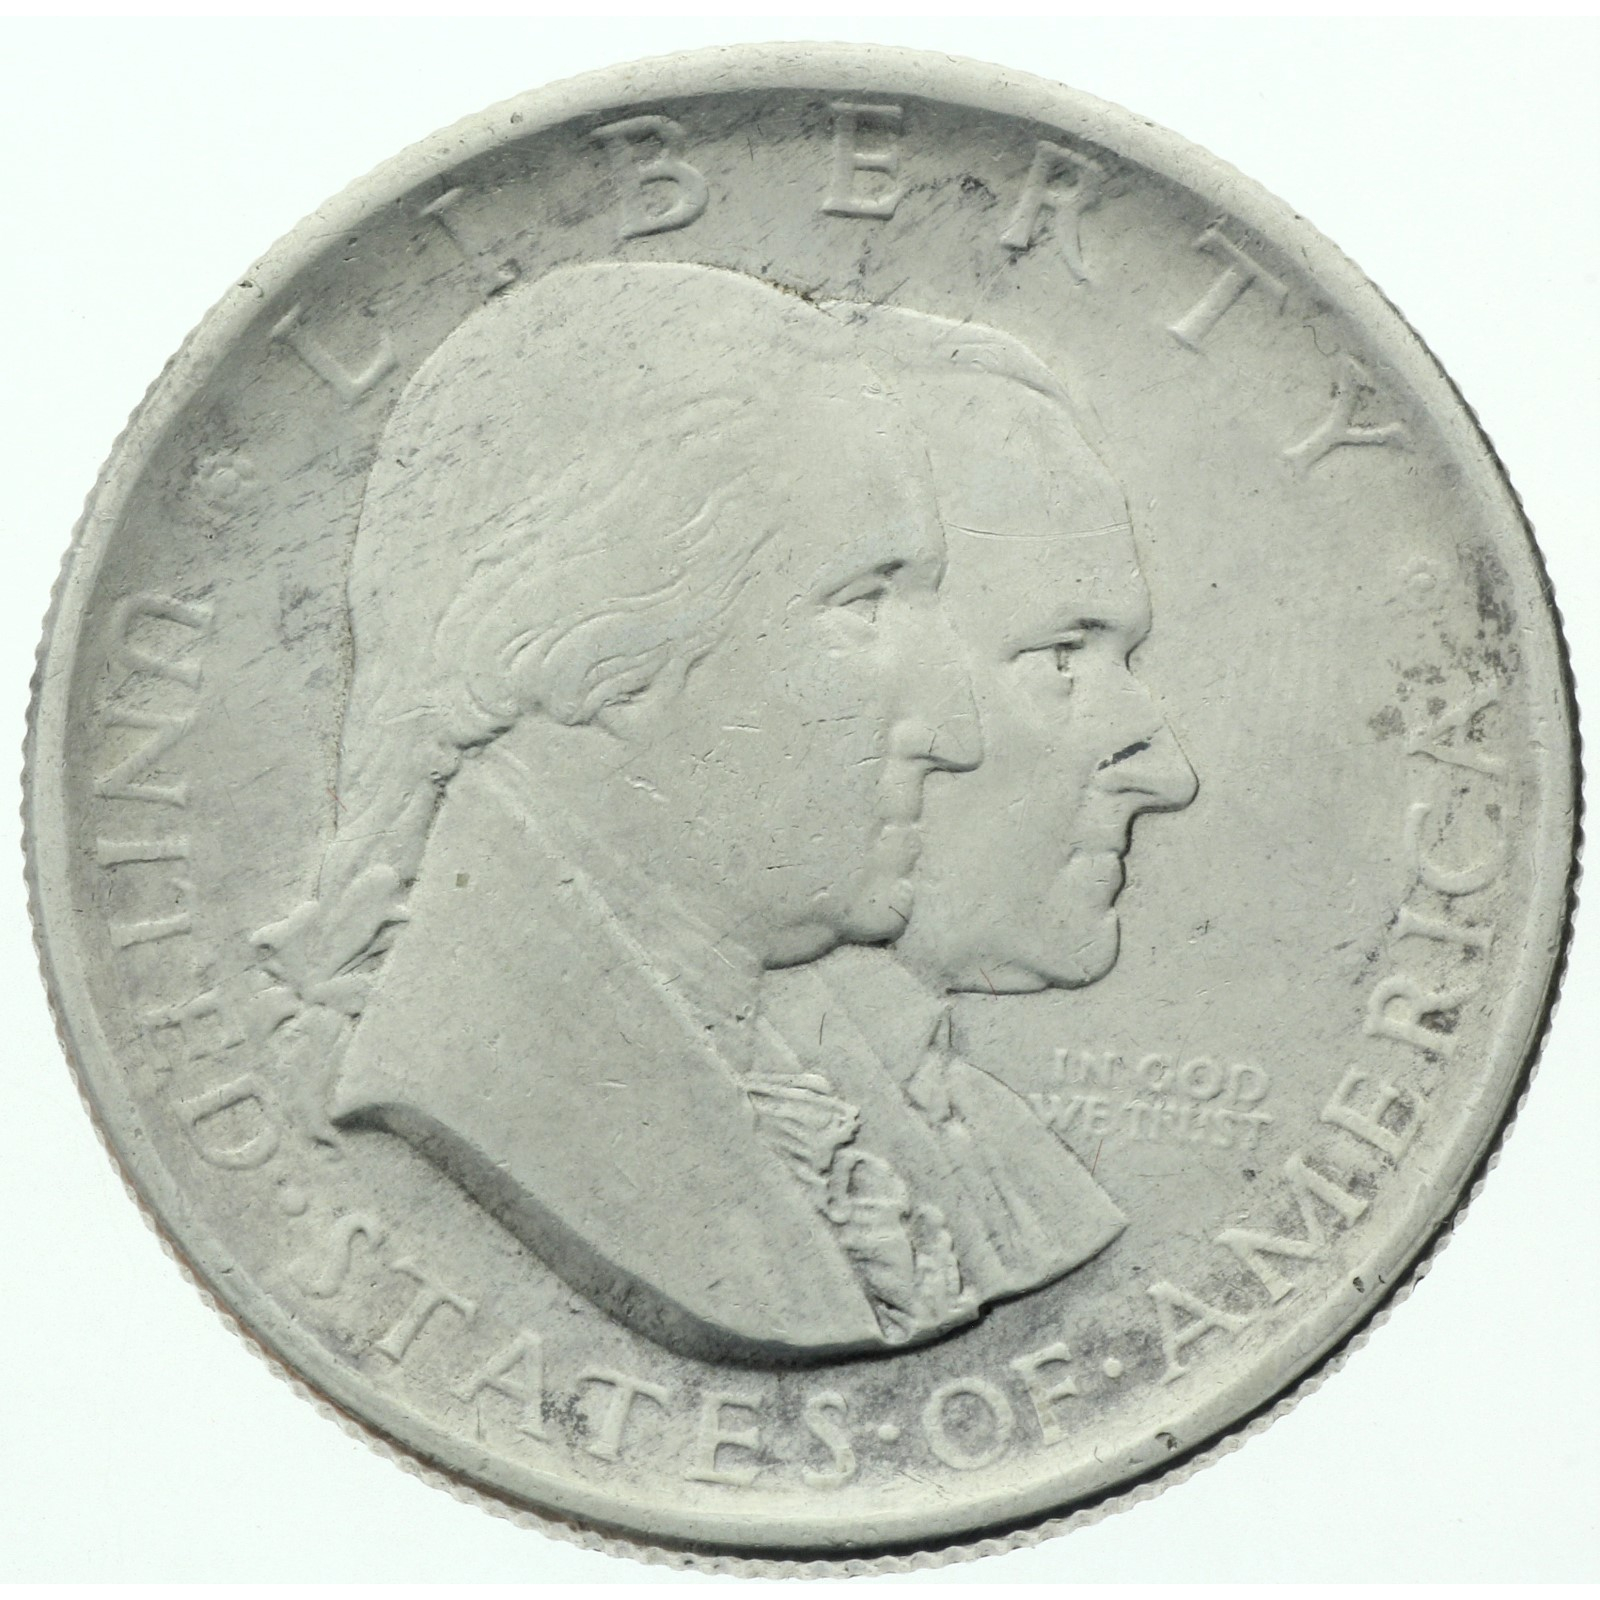 USA - 1/2 dollar - 1926 - 150th anniversary of constitution